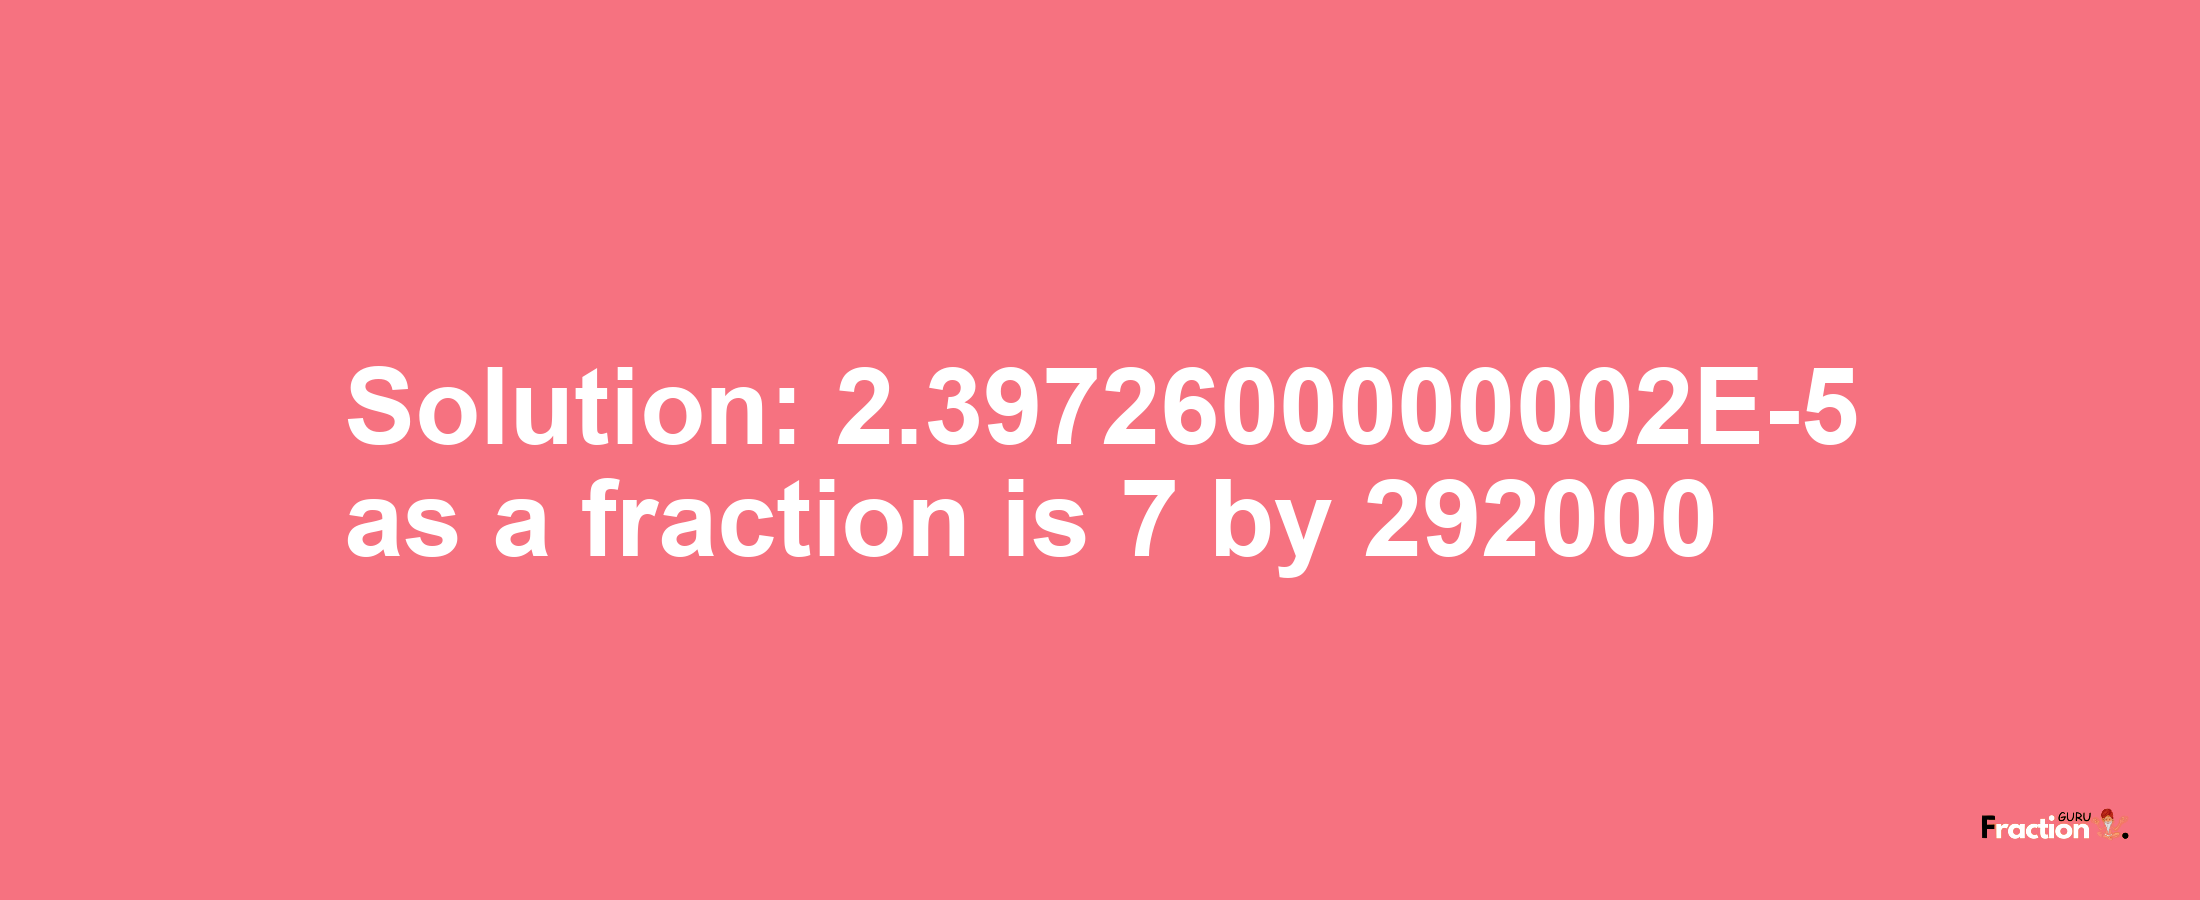 Solution:2.3972600000002E-5 as a fraction is 7/292000